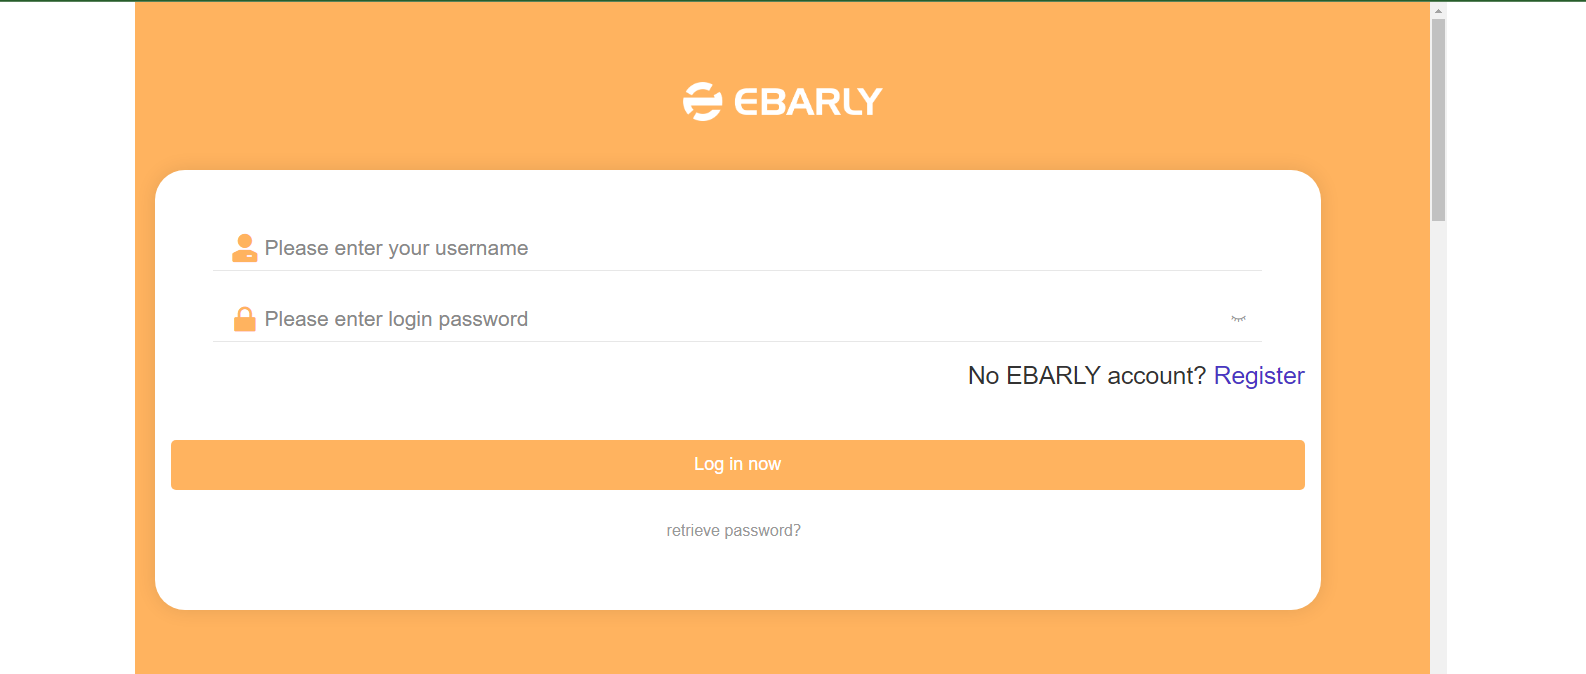 H5.ebarly.org Review – H5.ebarly.org Legit or Scam?